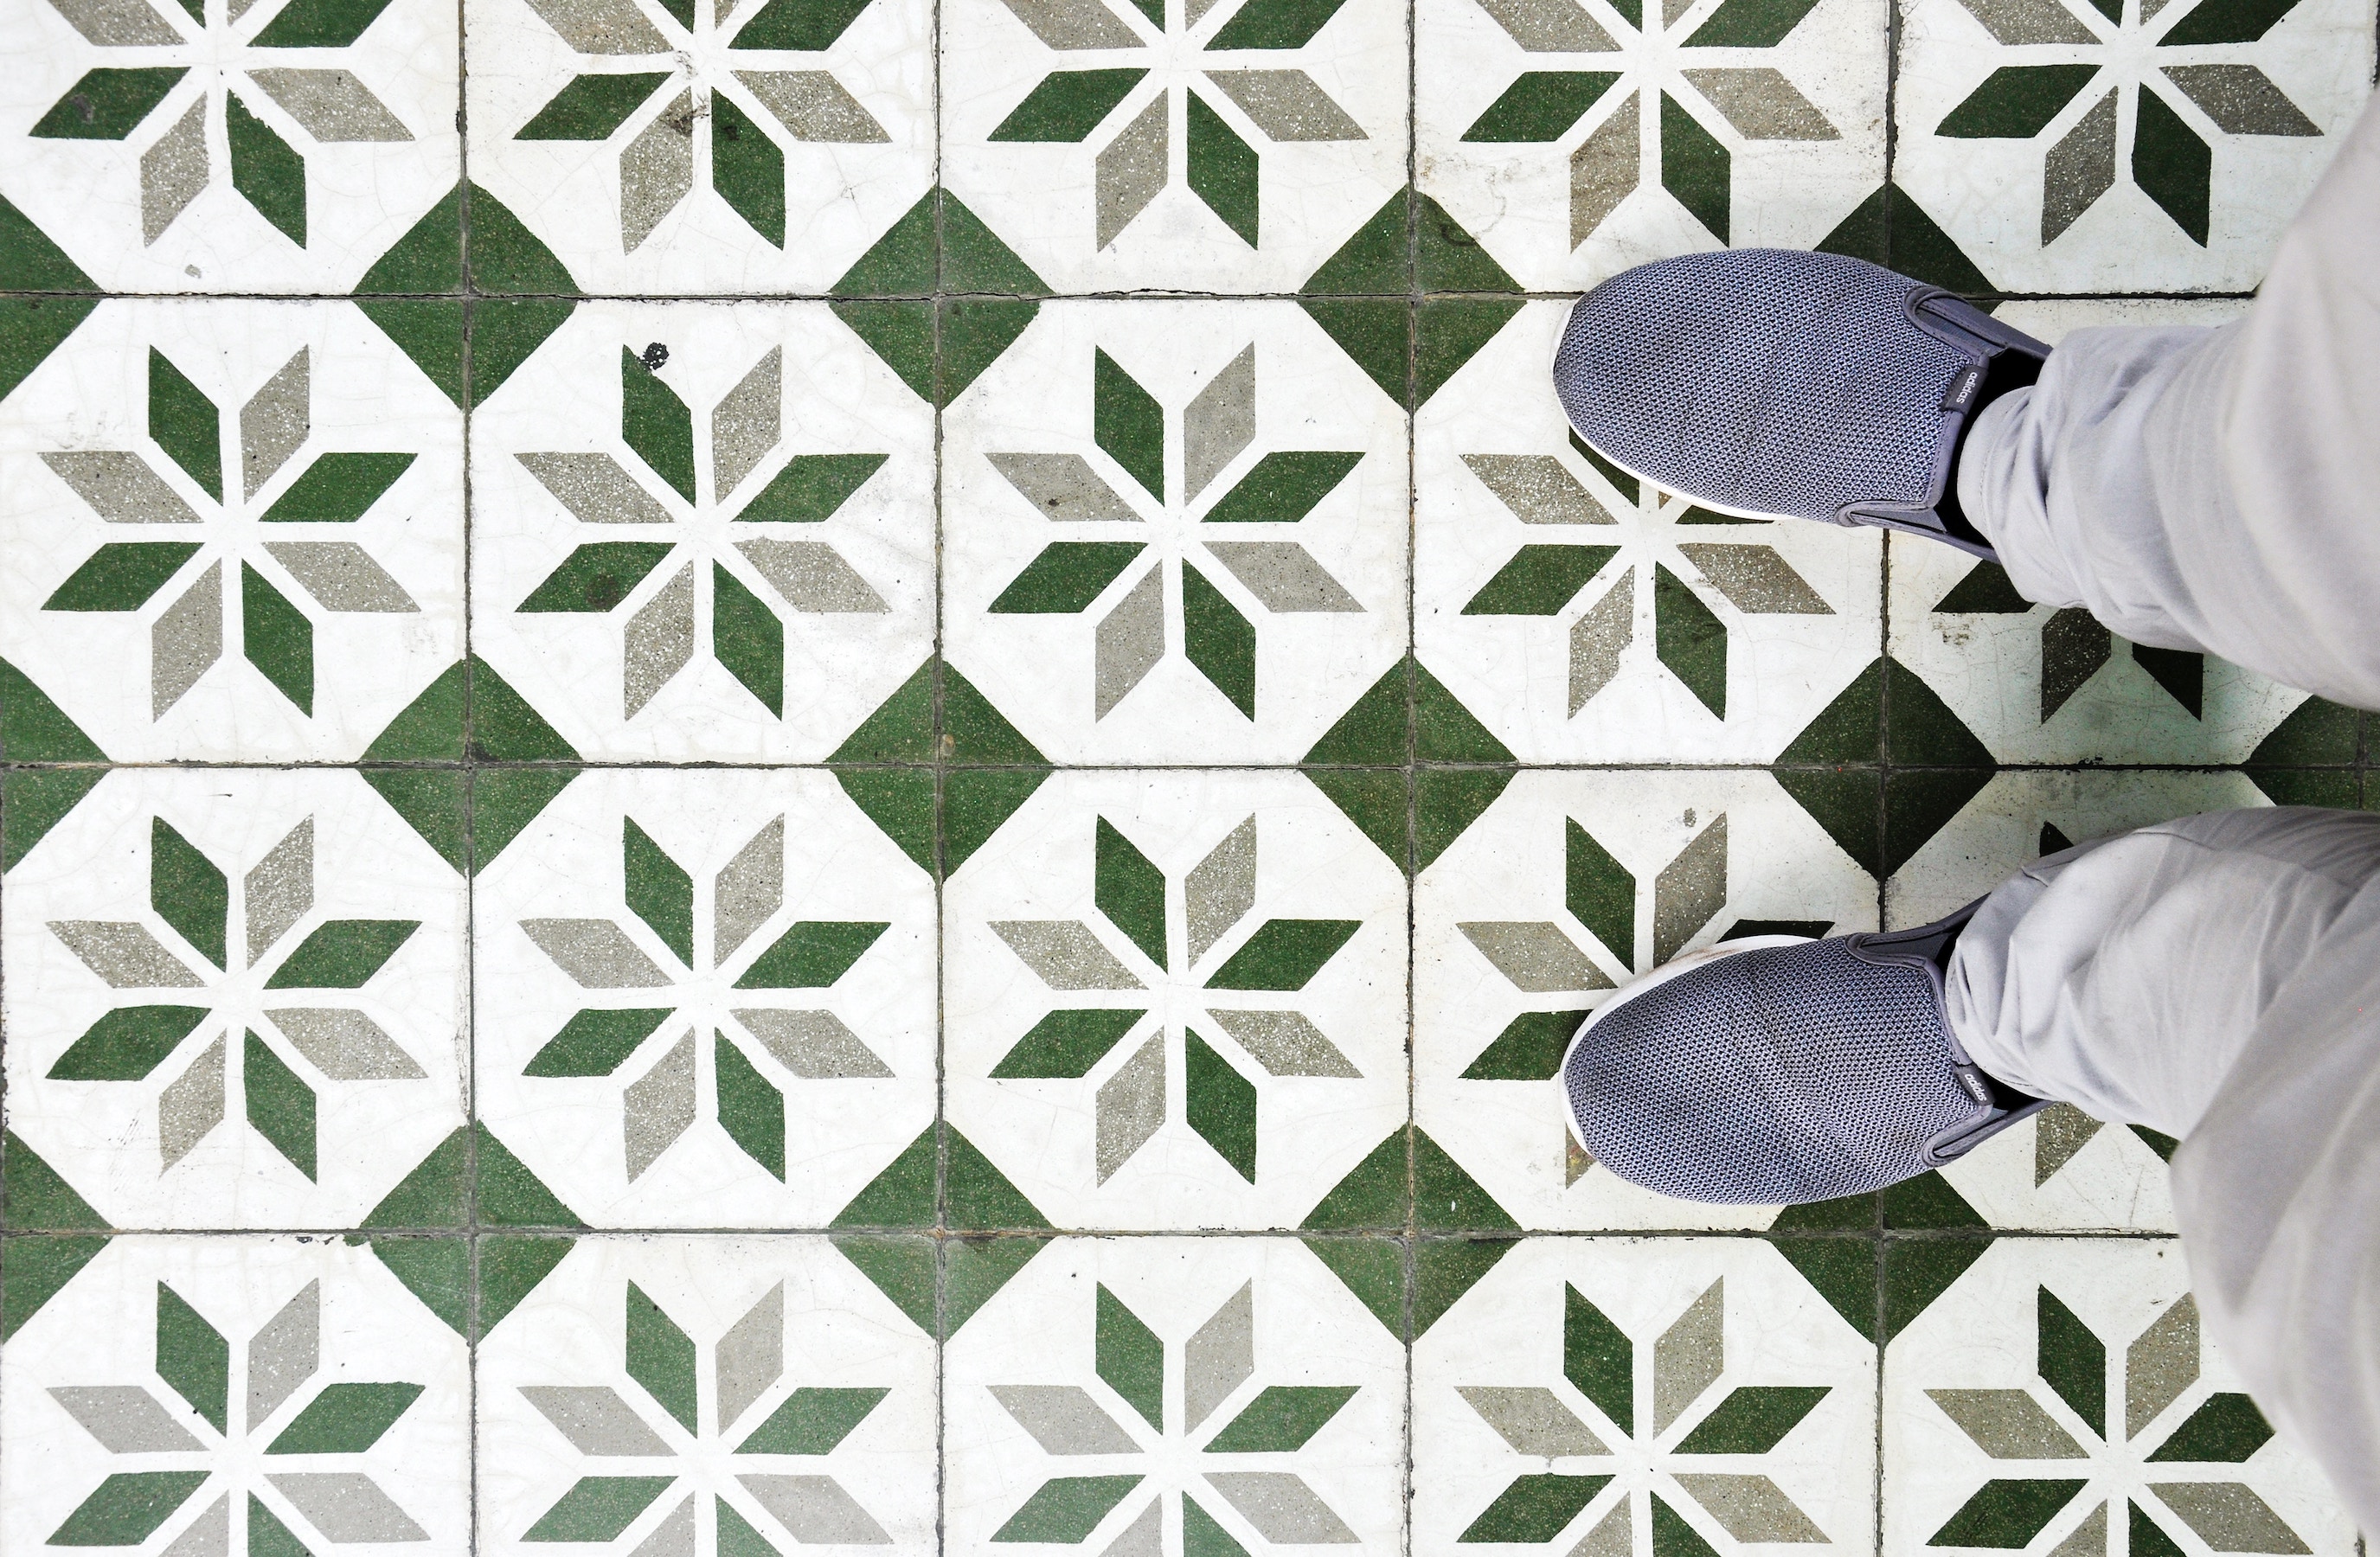 Patterned tile floor with person standing on it